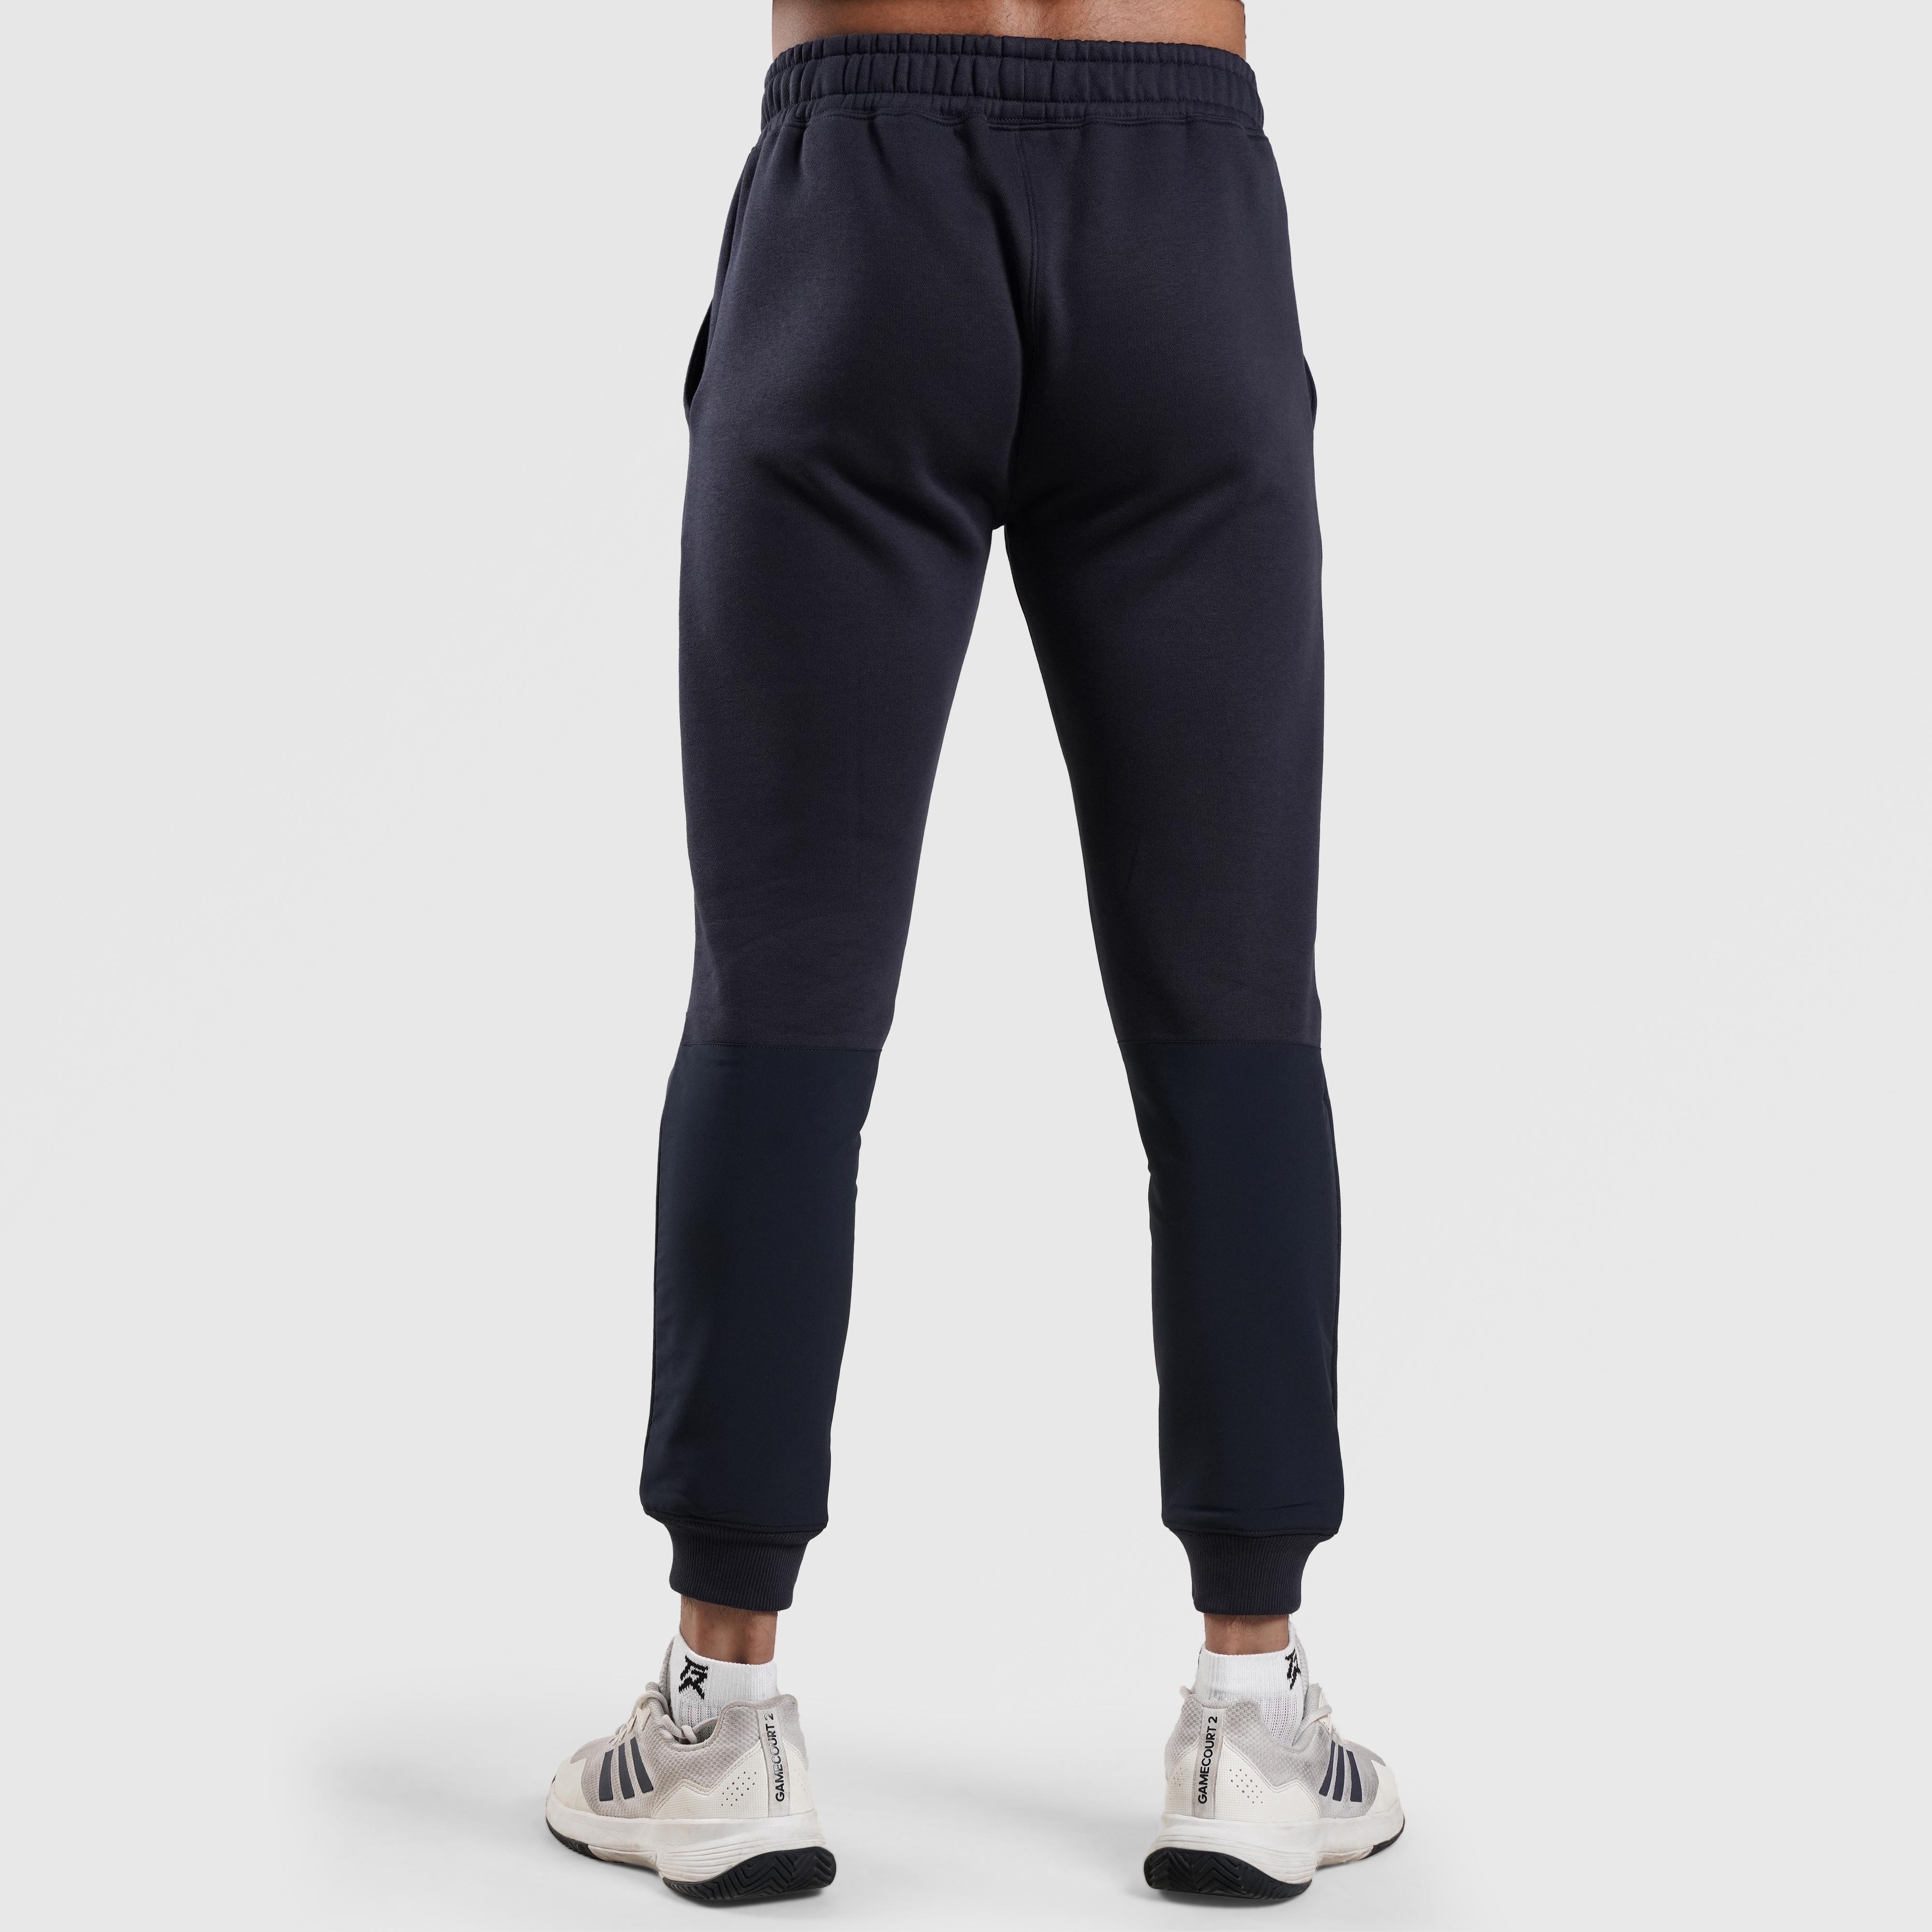 Proto Trousers (Navy)